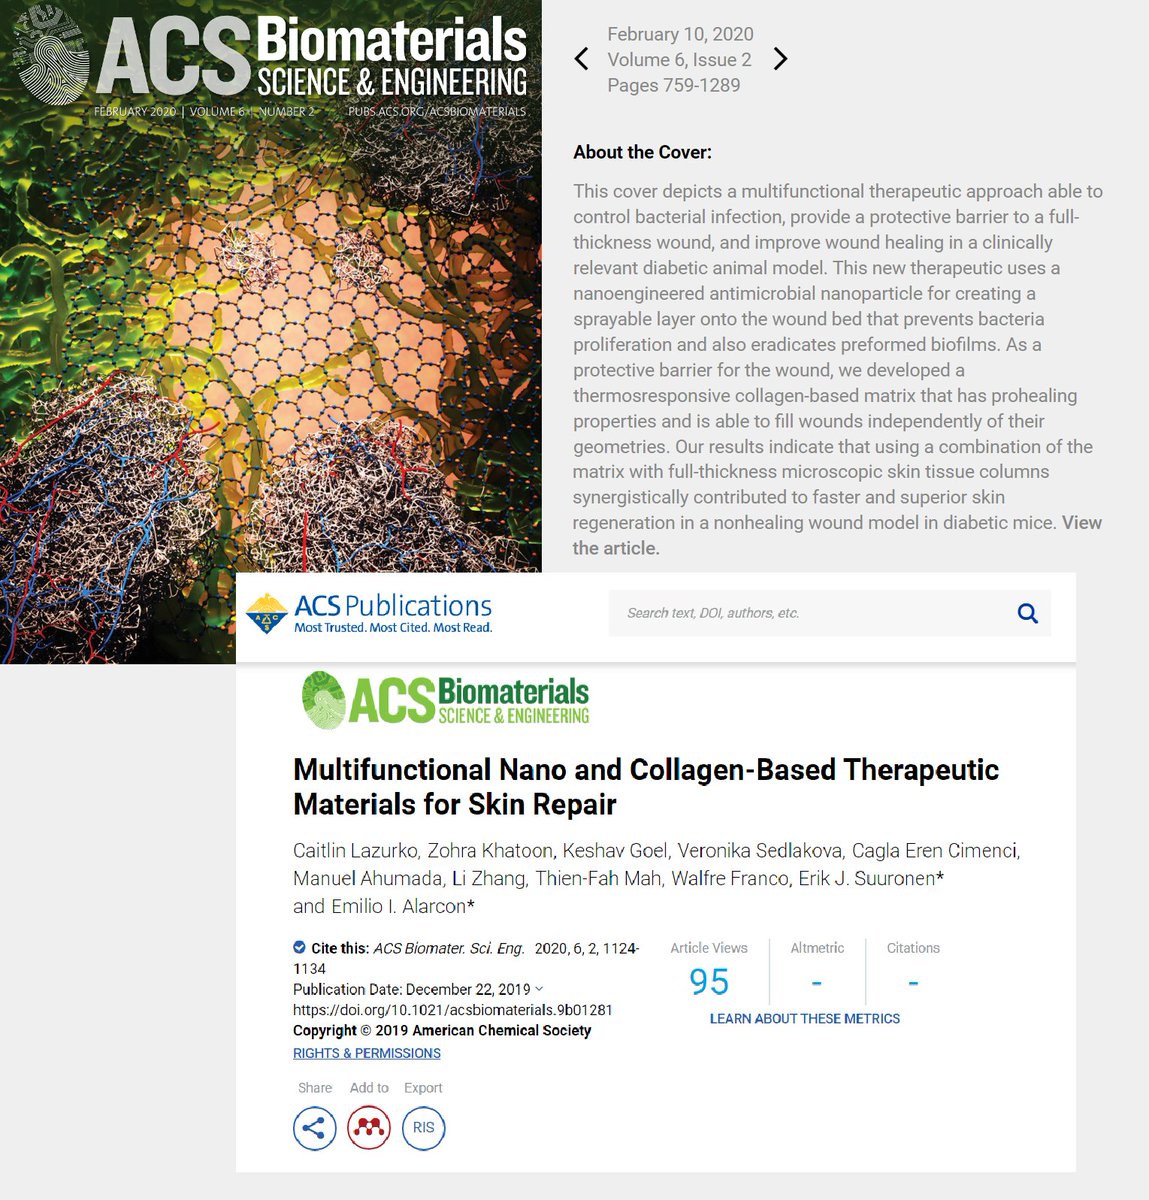 Our most recent publication is now on the front cover of the @ACSBiomaterials 🎉 #biomaterials #tissueregeneration
@BEaTSResearch